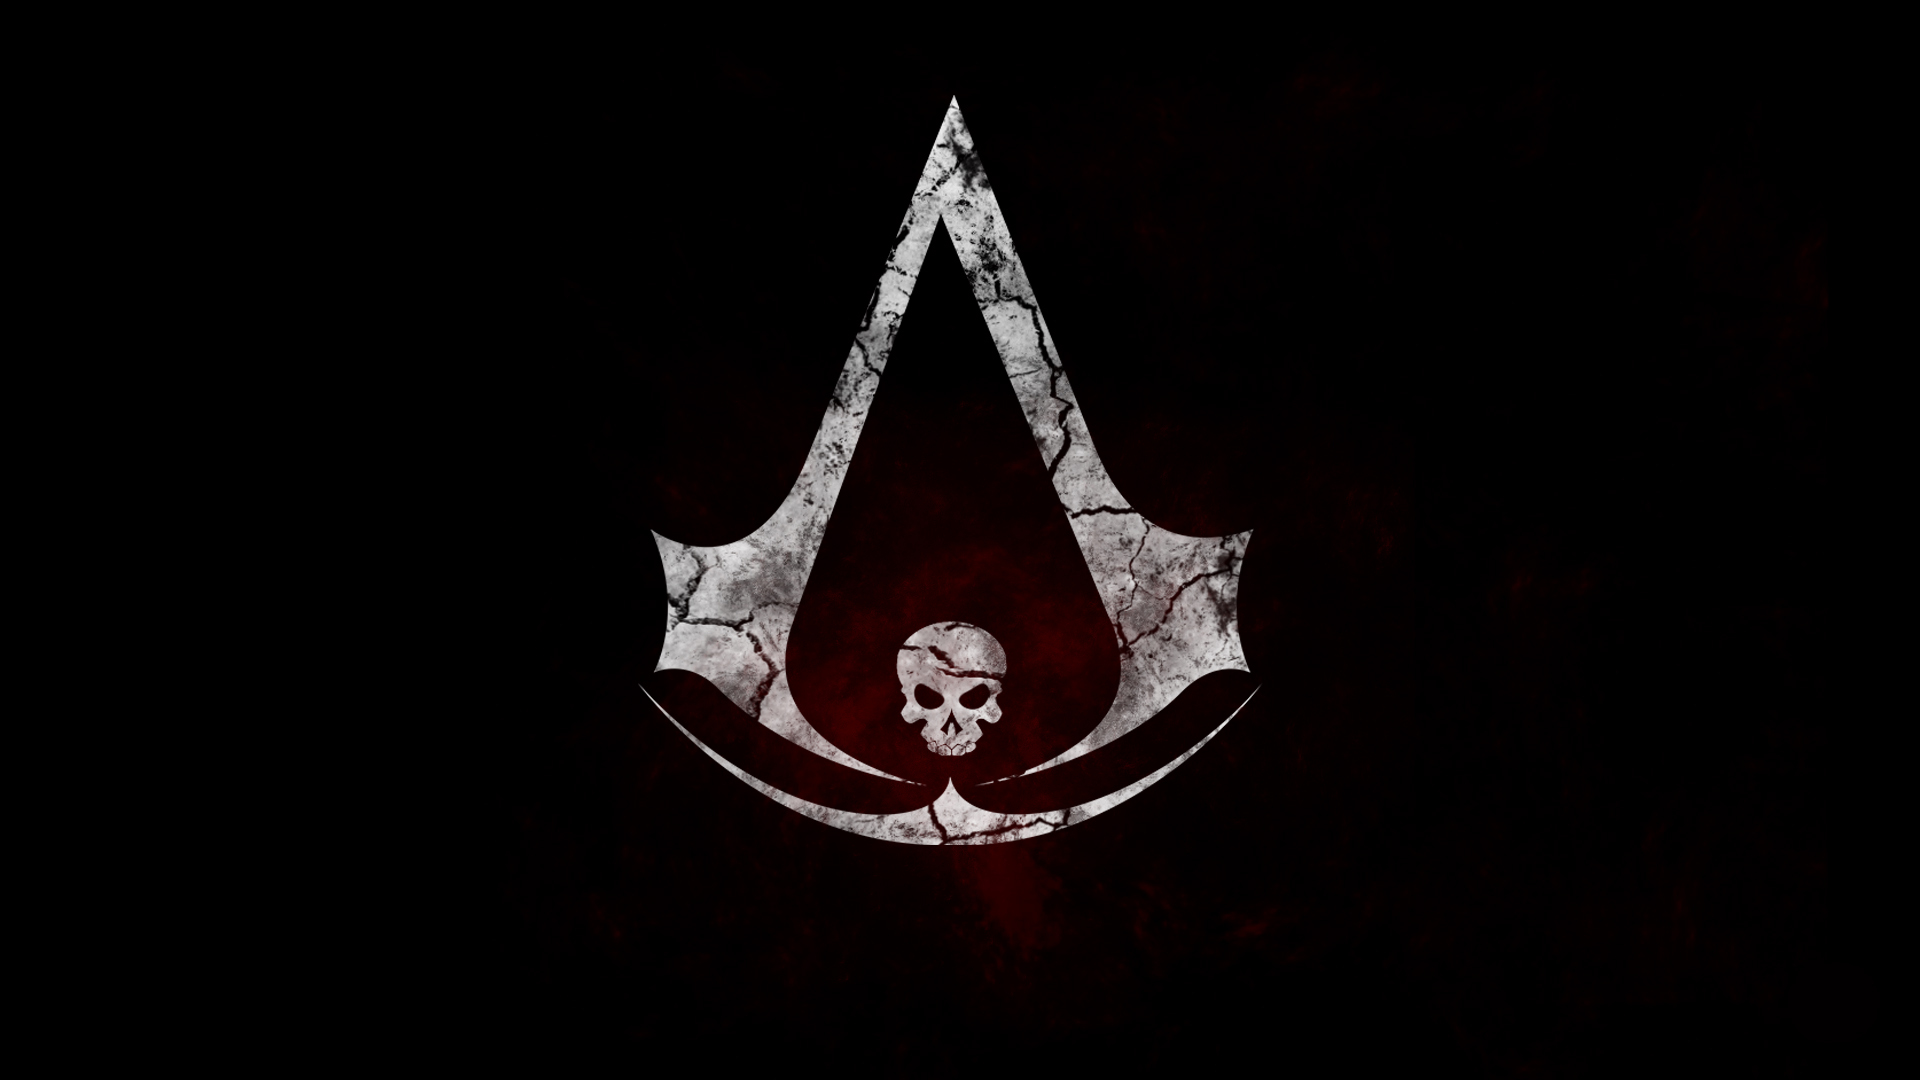 assassin's creed, assassin's creed iv: black flag, video game, logo lock screen backgrounds